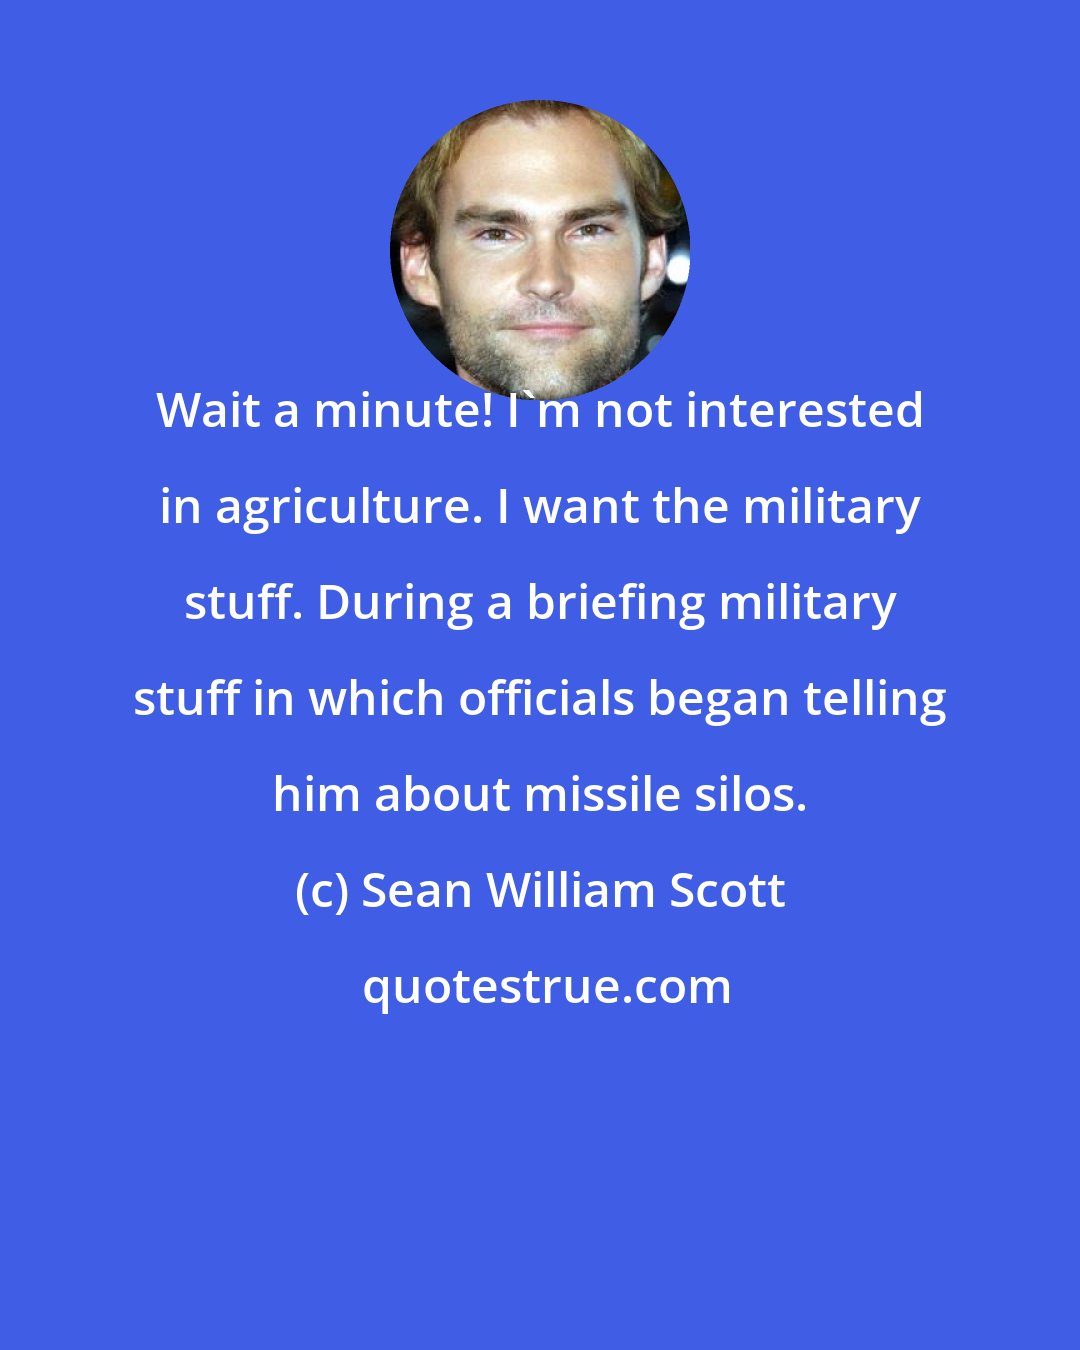 Sean William Scott: Wait a minute! I'm not interested in agriculture. I want the military stuff. During a briefing military stuff in which officials began telling him about missile silos.